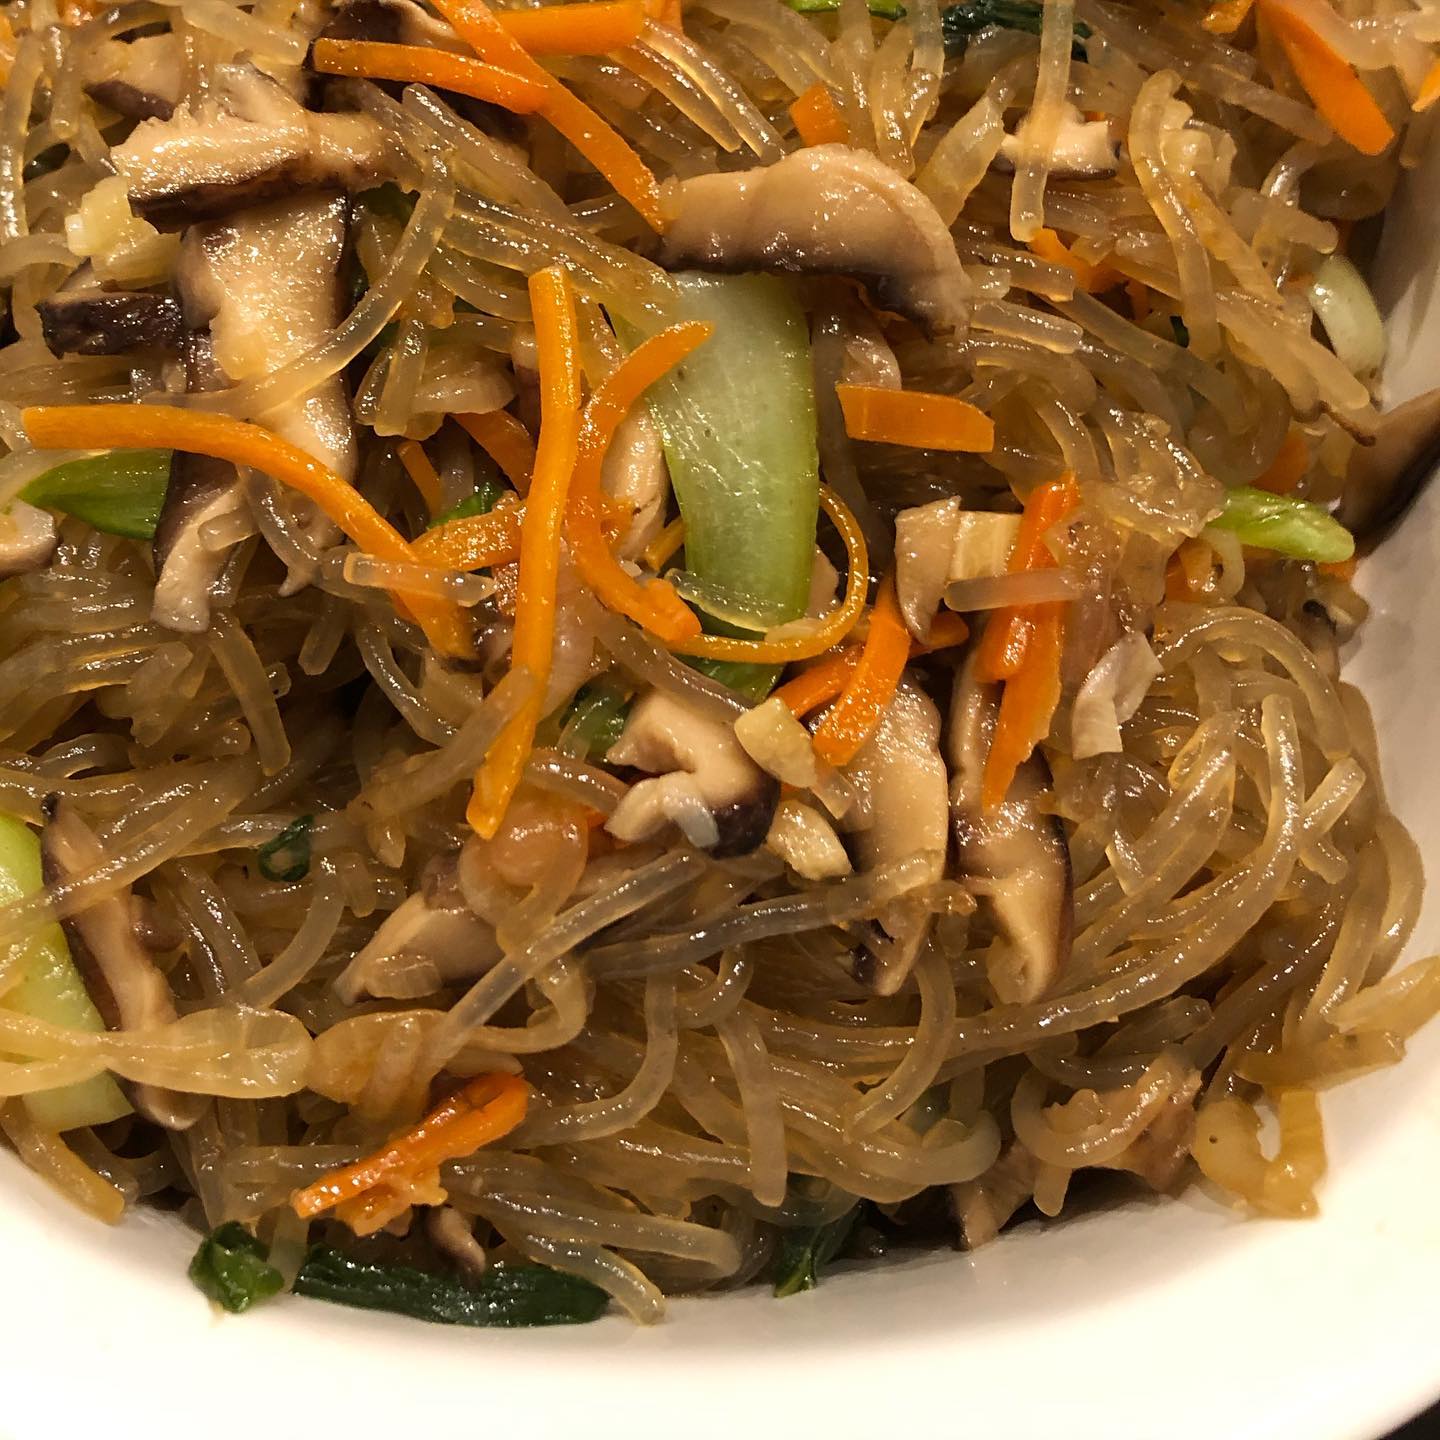 Jap Chae (Korean stir-fried glass noodles with vegetables)! Yum!  Check out the recipe at www.simplyasianhome.com.